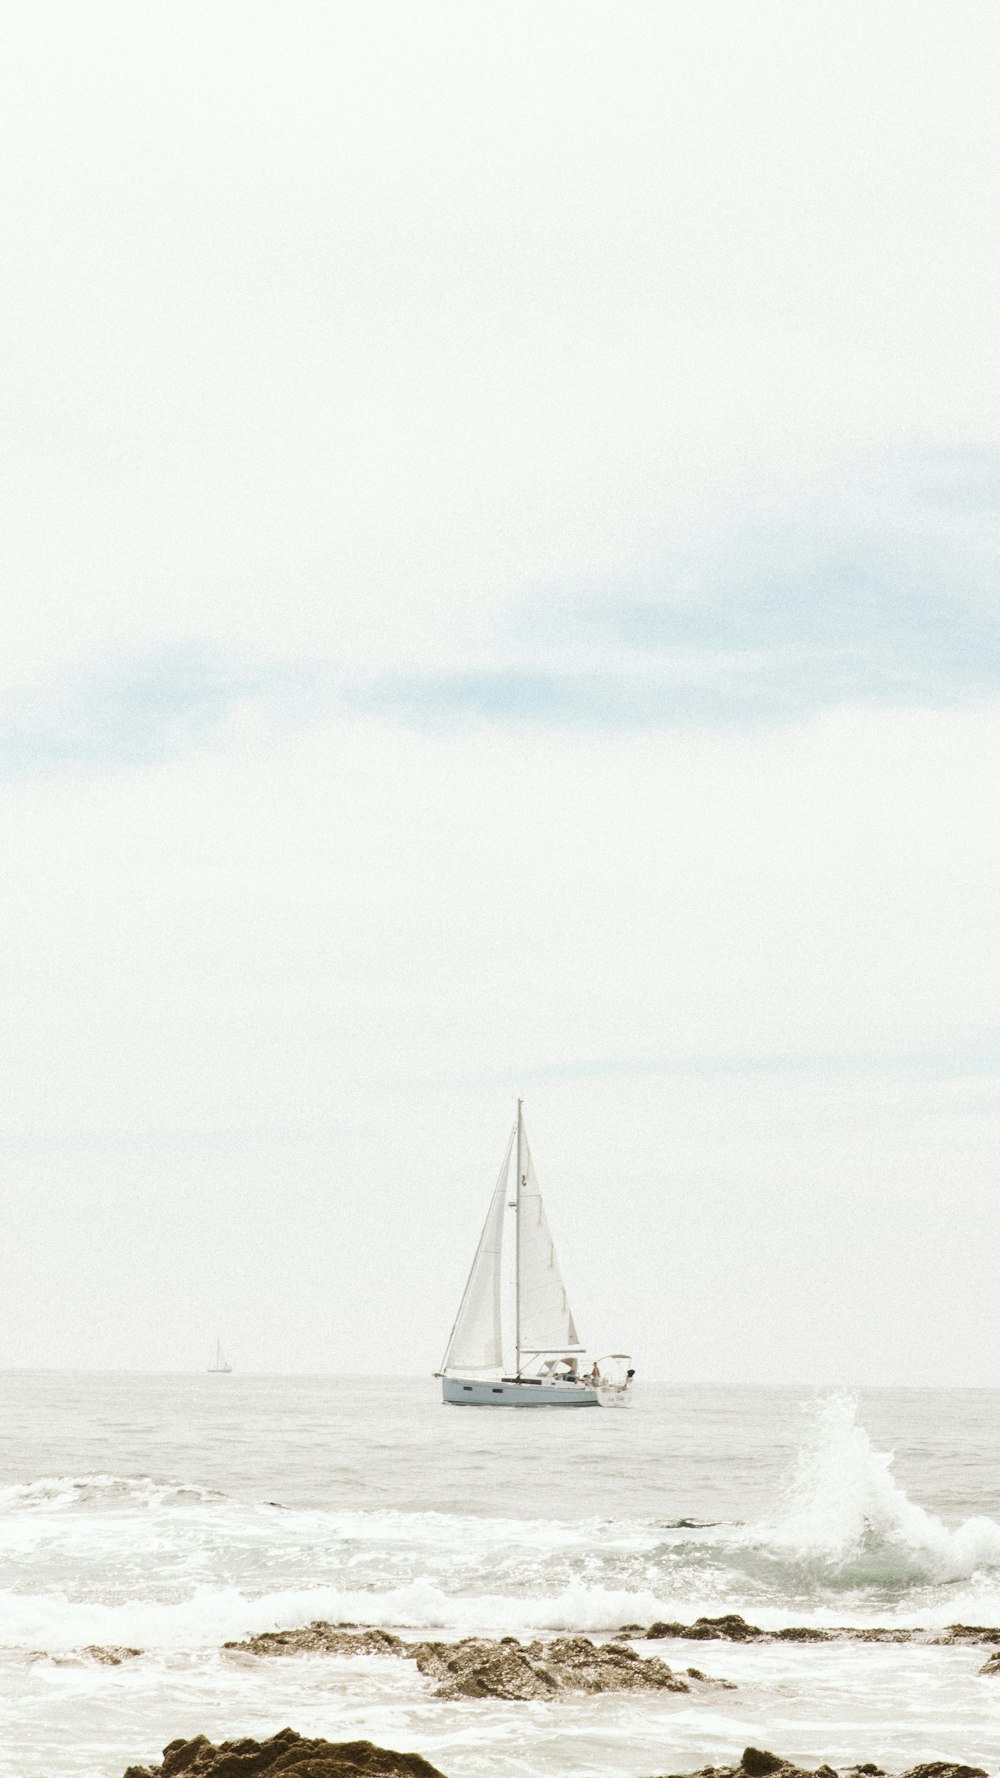 a sailboat is out on the ocean